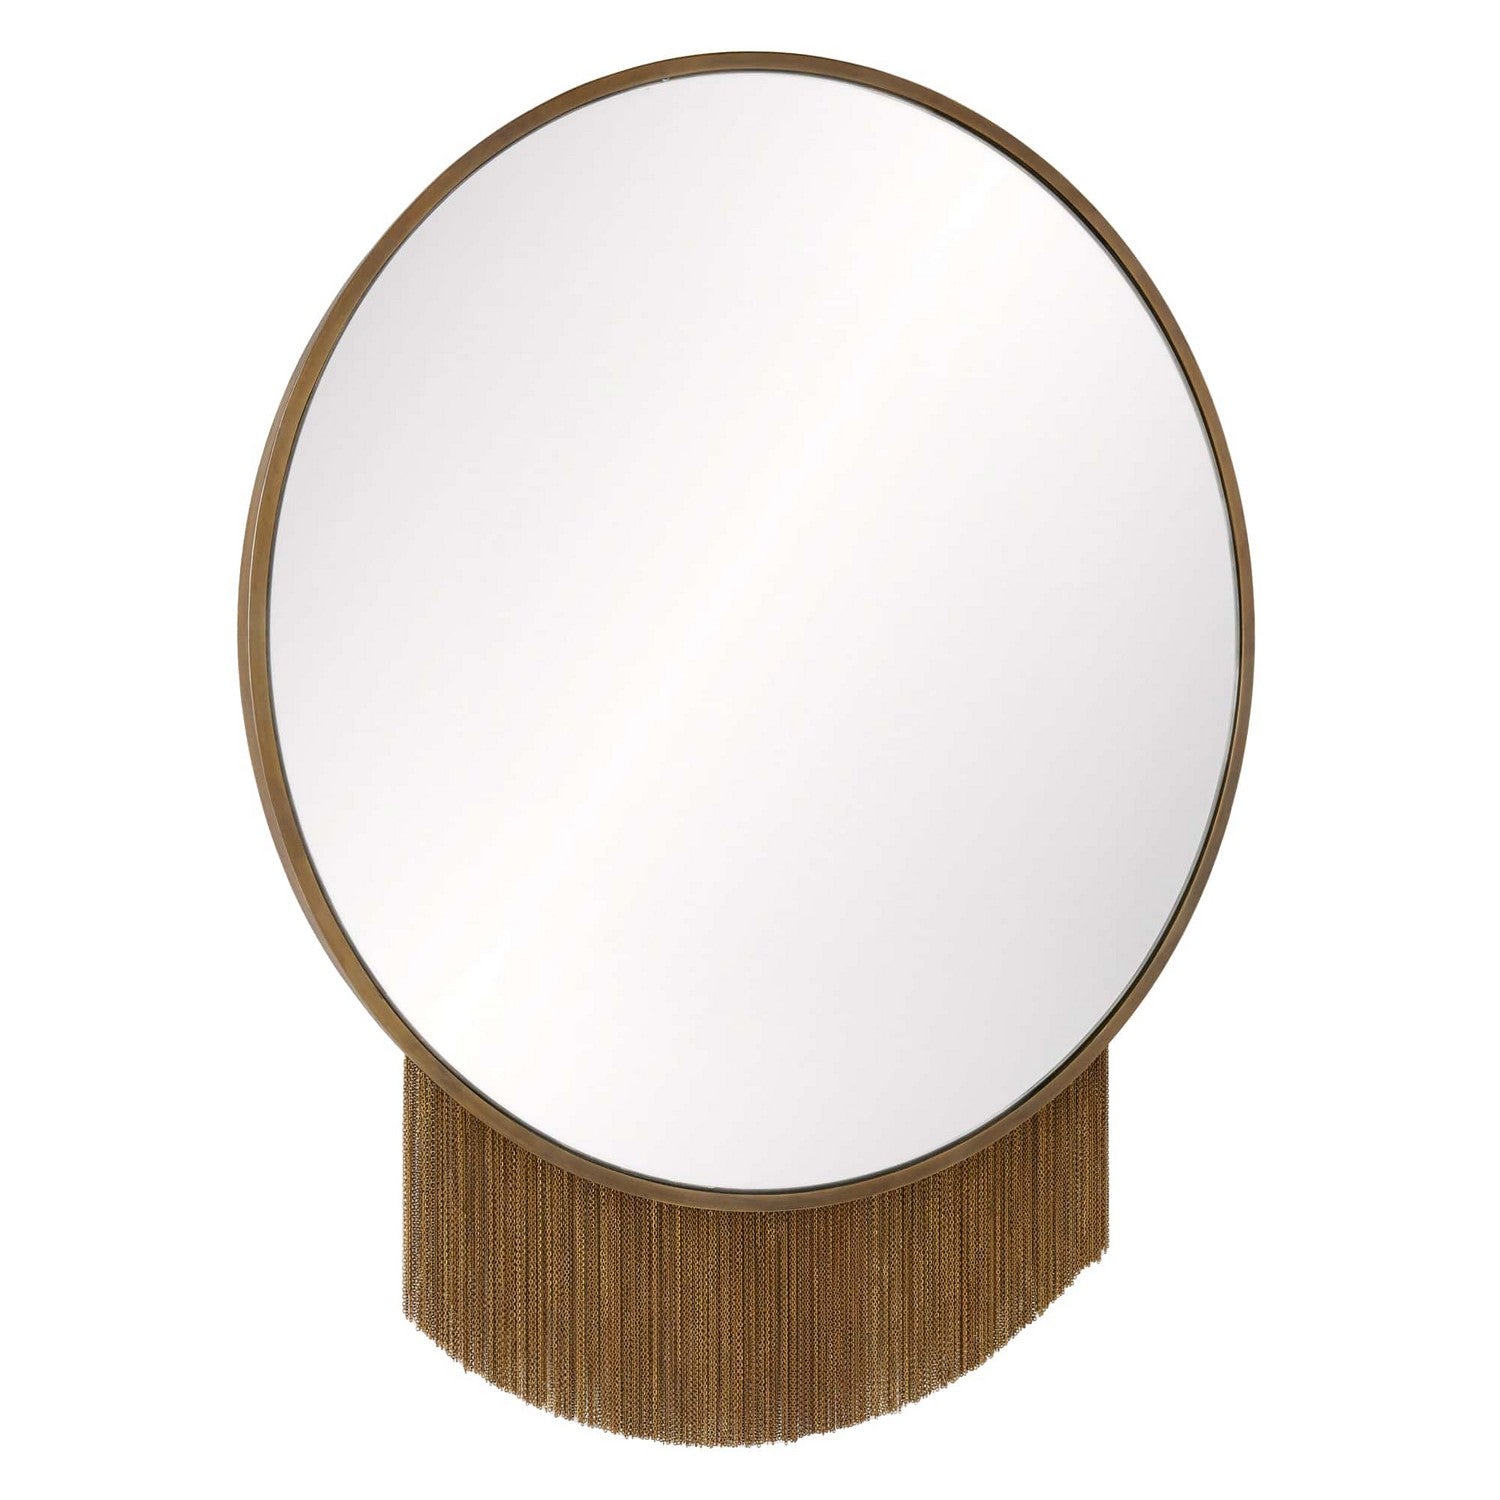 Mirror from the Winchester collection in Antique Brass finish